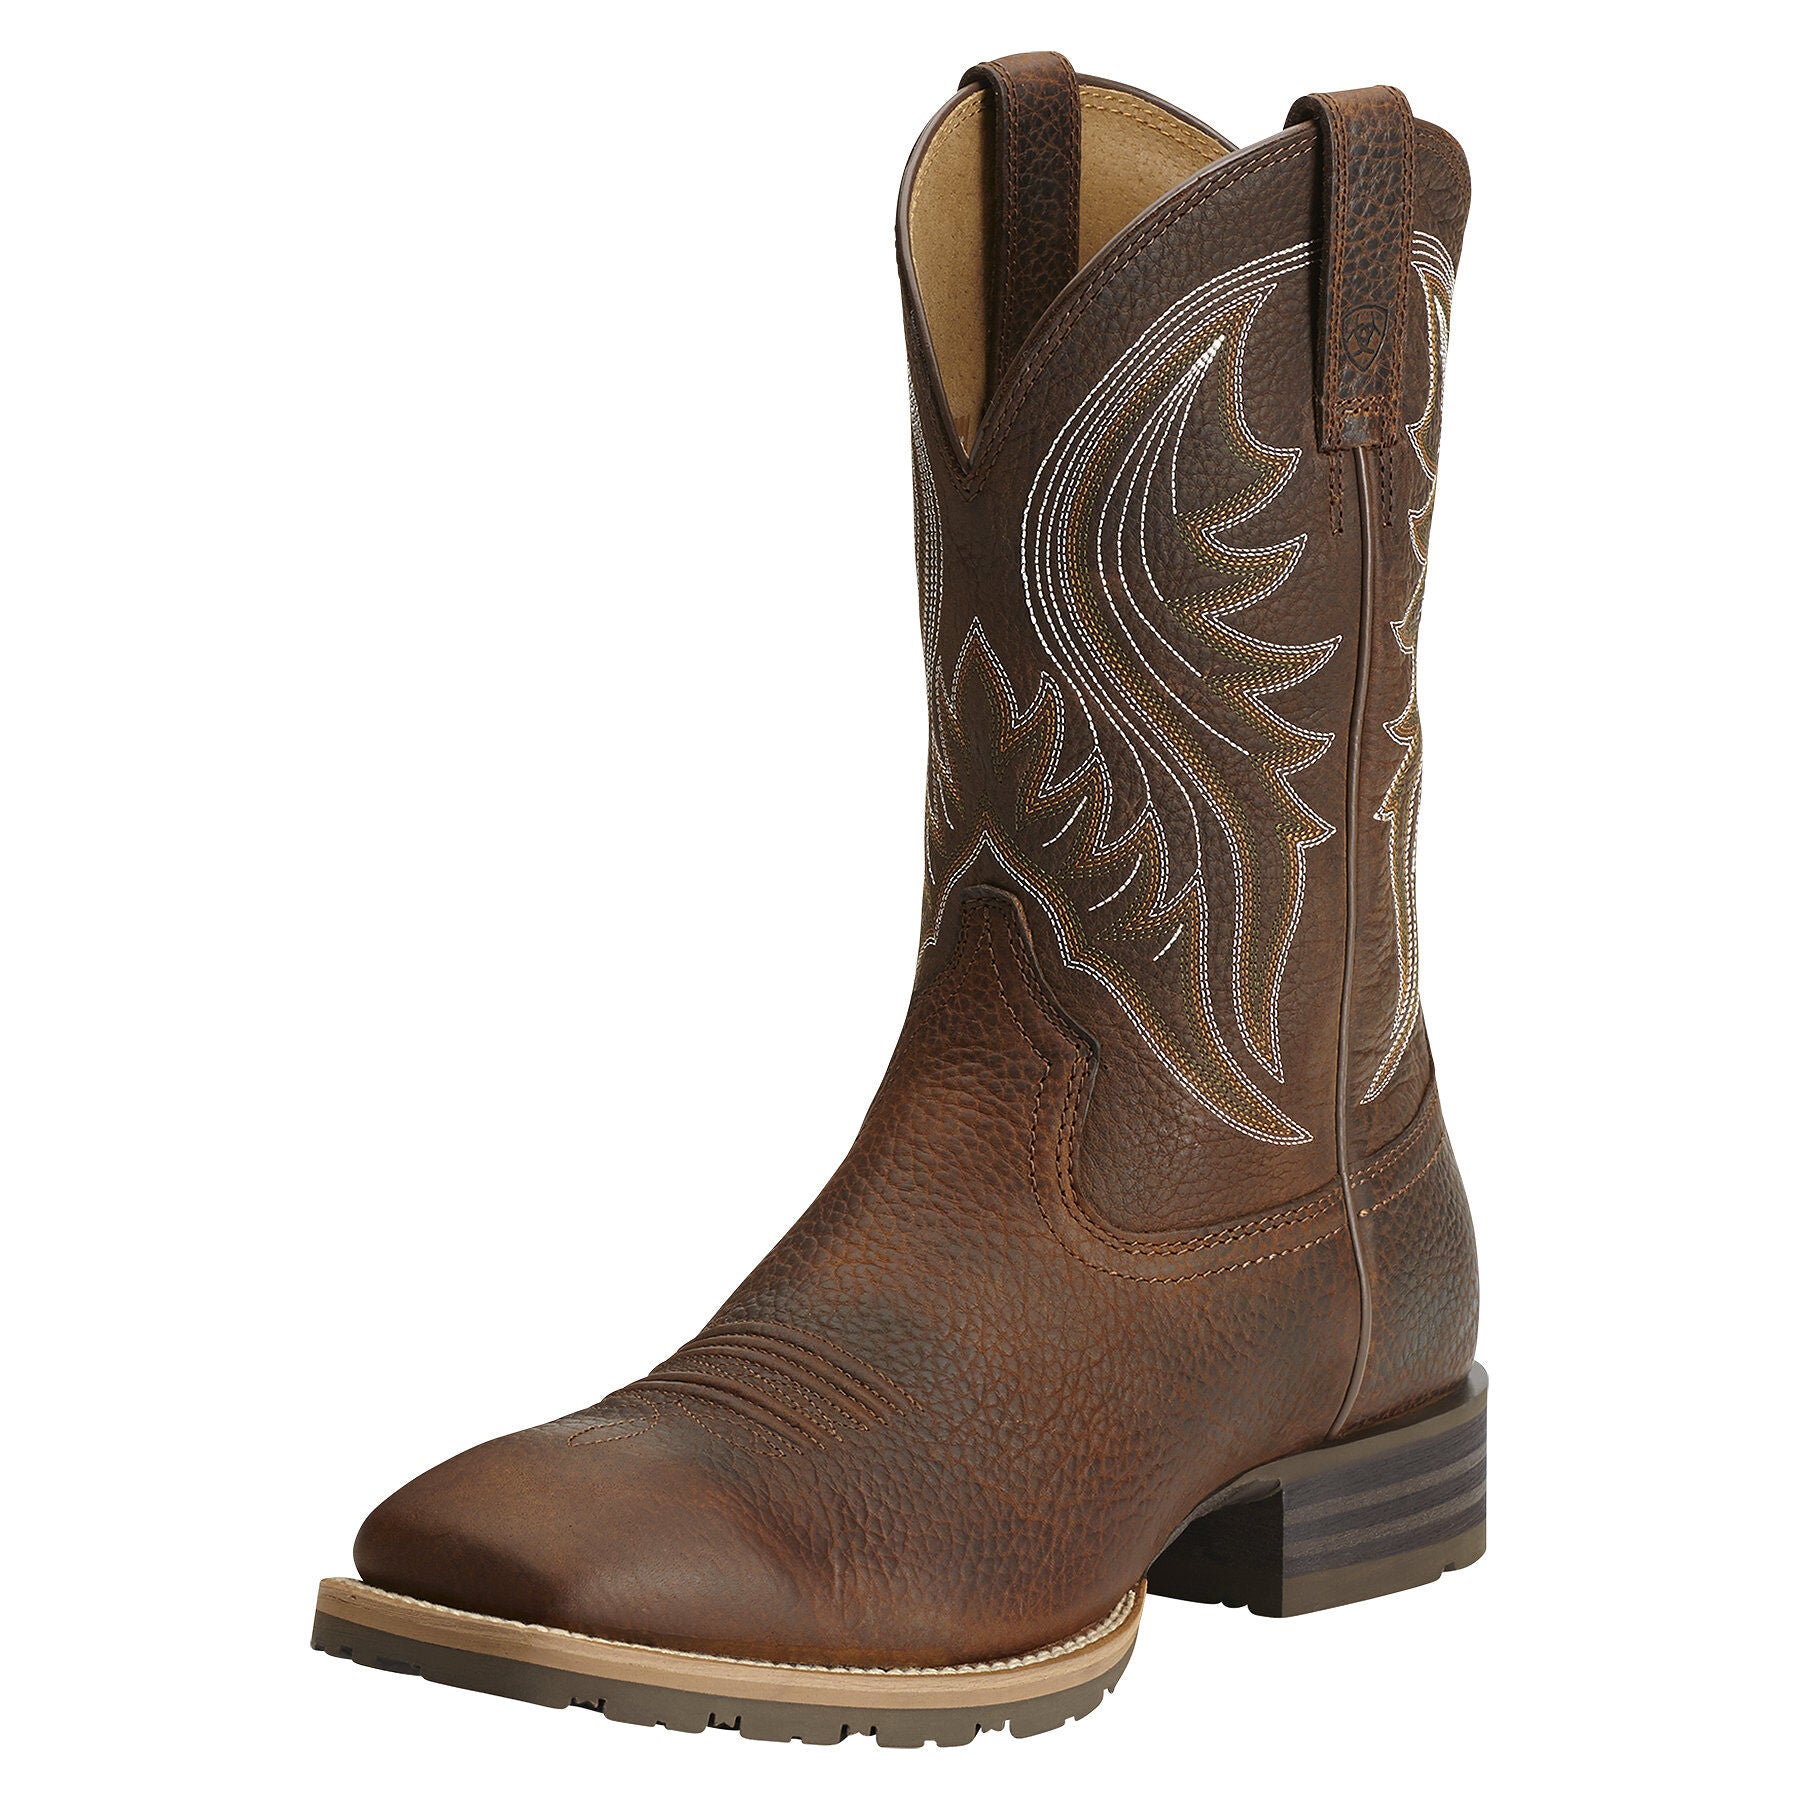 Ariat Men's Hybrid Rancher Boot - Brown Oiled Rowdy - French's Boots